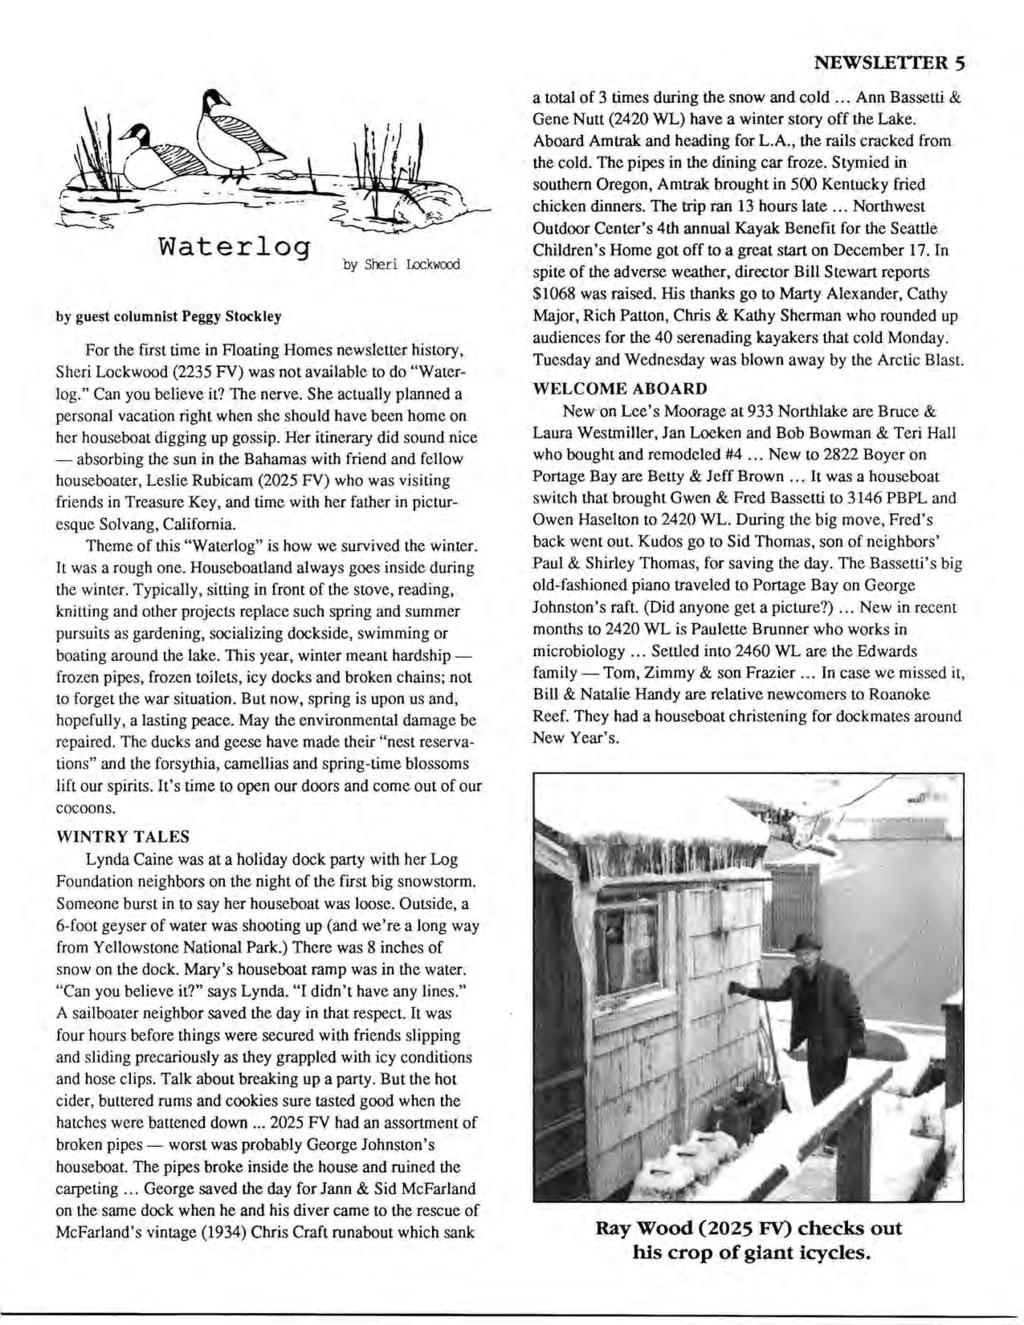 NEWSLEITER 5 by guest columnist Peggy Stockley by Sheri Lockwood For the first time in Floating Homes newsletter history, Sheri Lockwood (2235 FV) was not available to do "Waterlog.